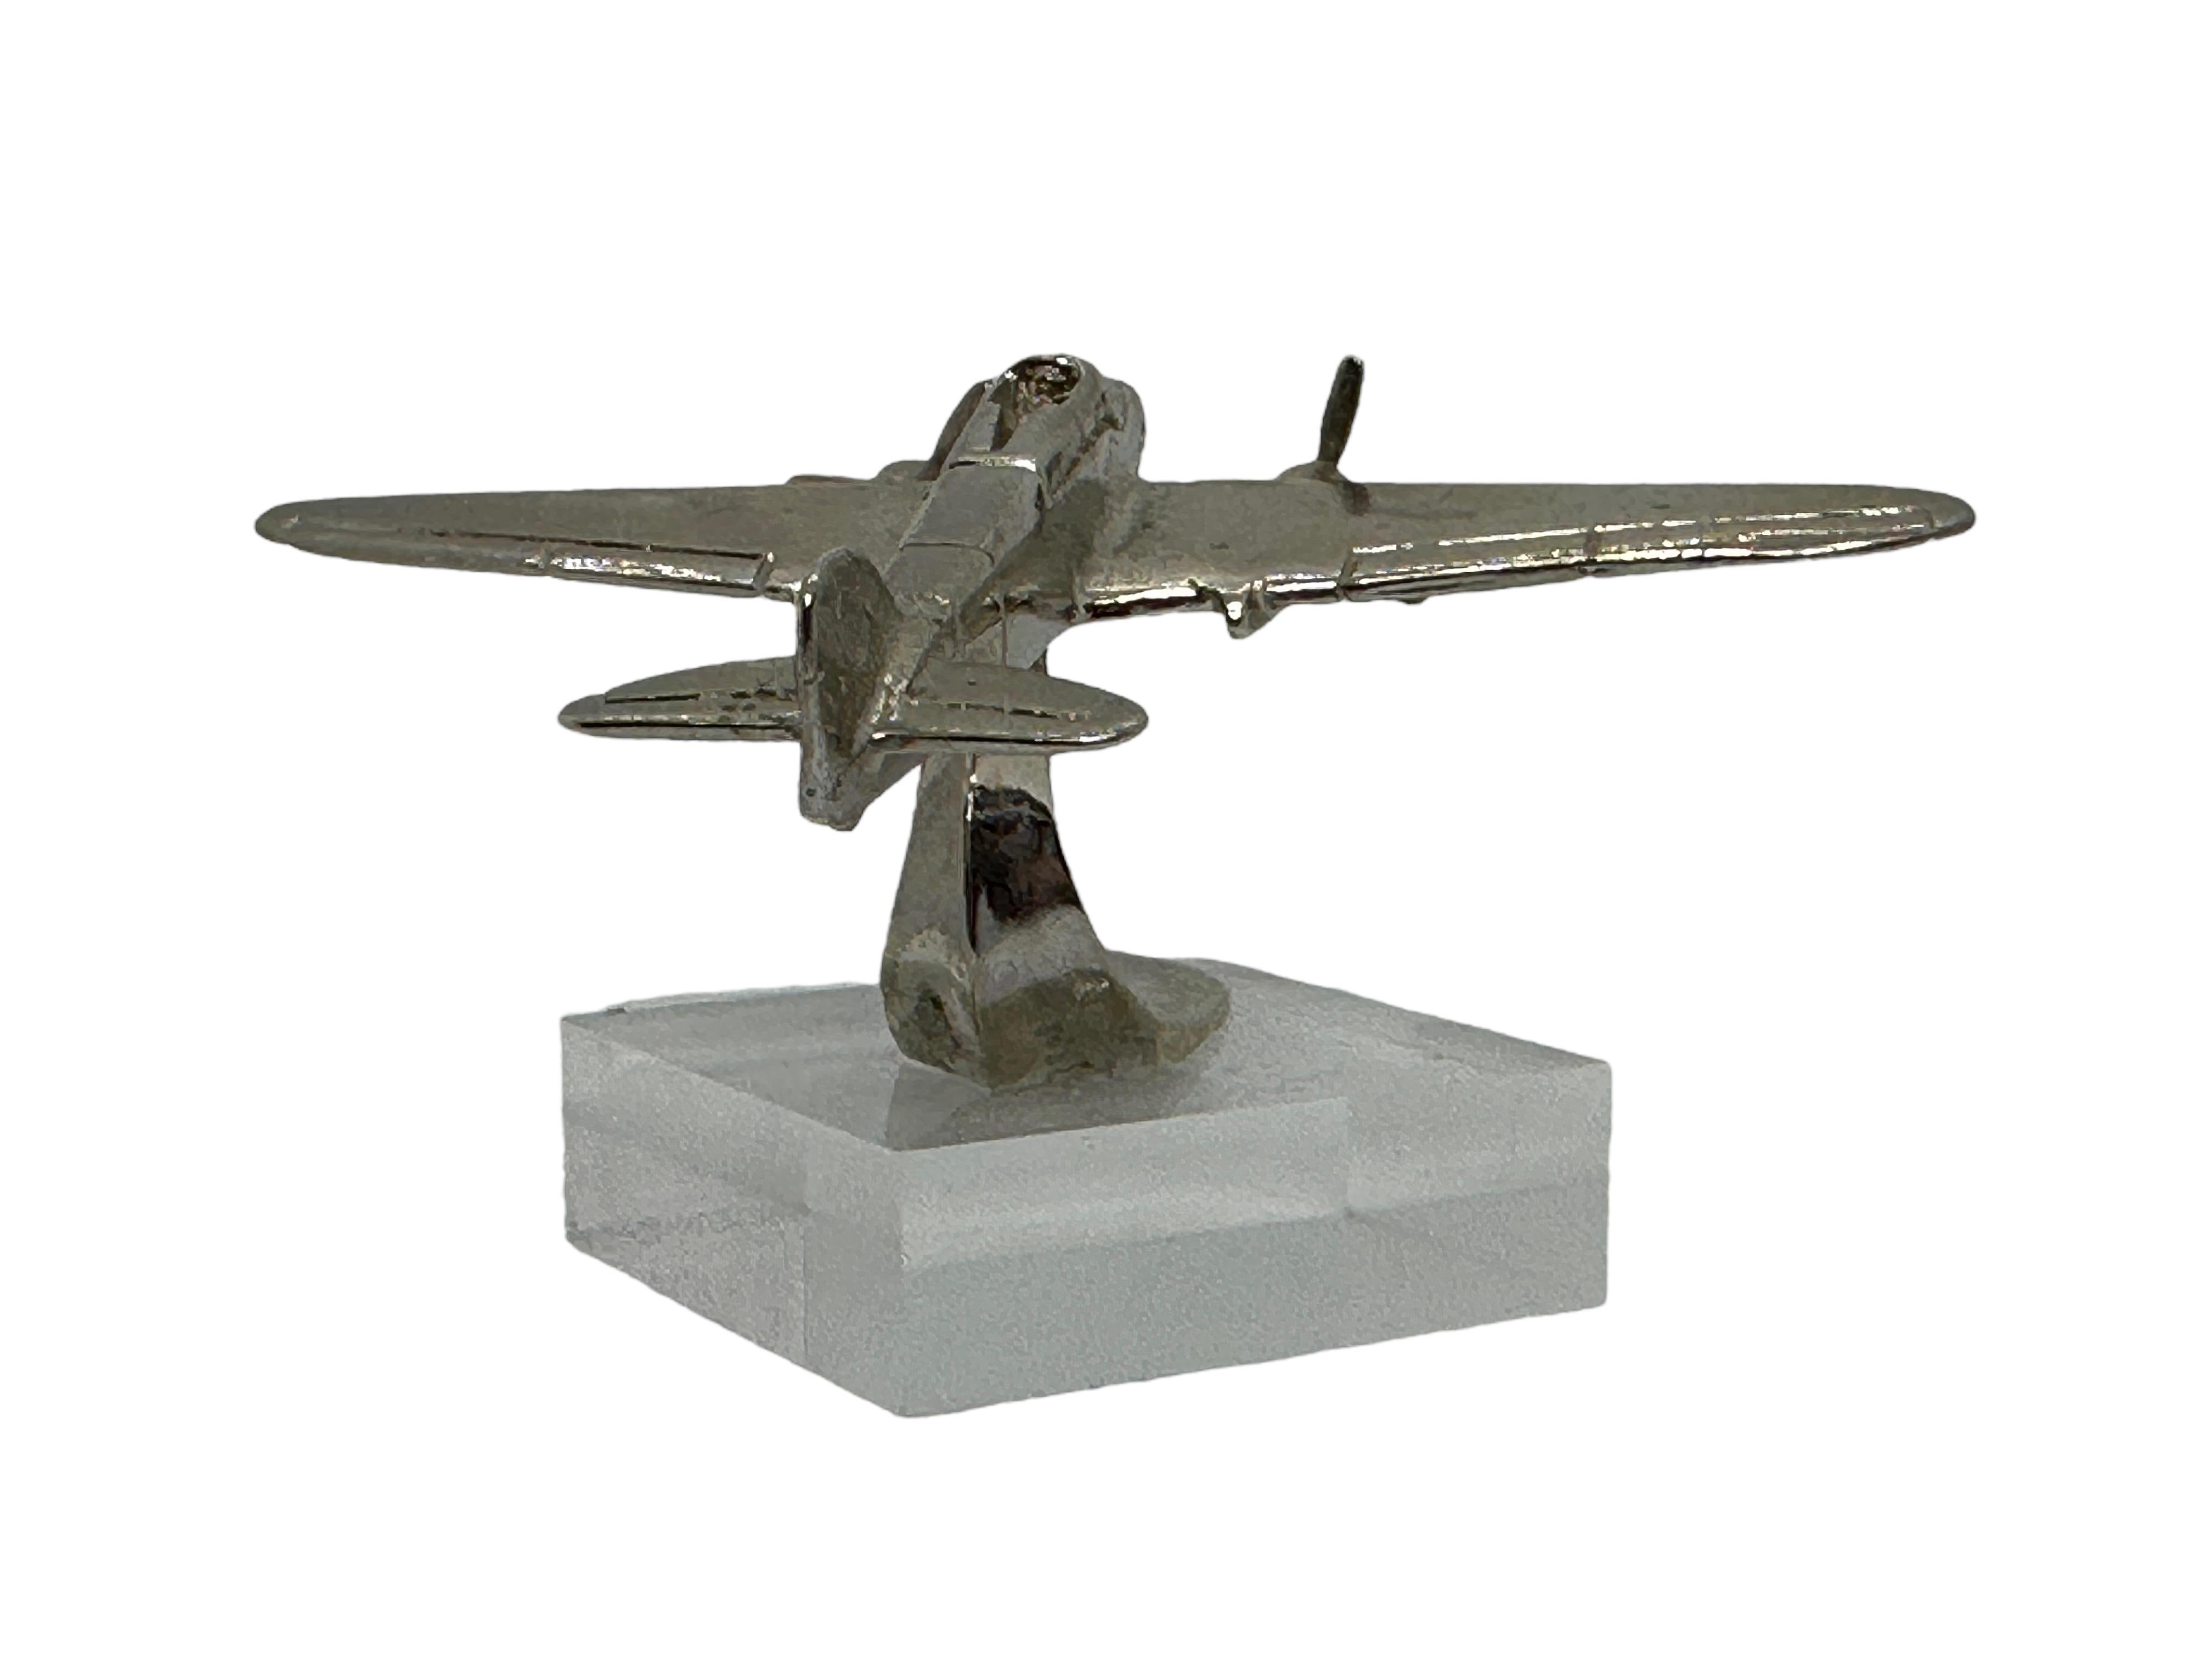 An Industrial plane model made in the 1980s. This unique object is made of metal and has a chrome finish. A nice Industrial sculpture for displaying them on a cupboard, credenza or desk. Also a nice addition to any collection.